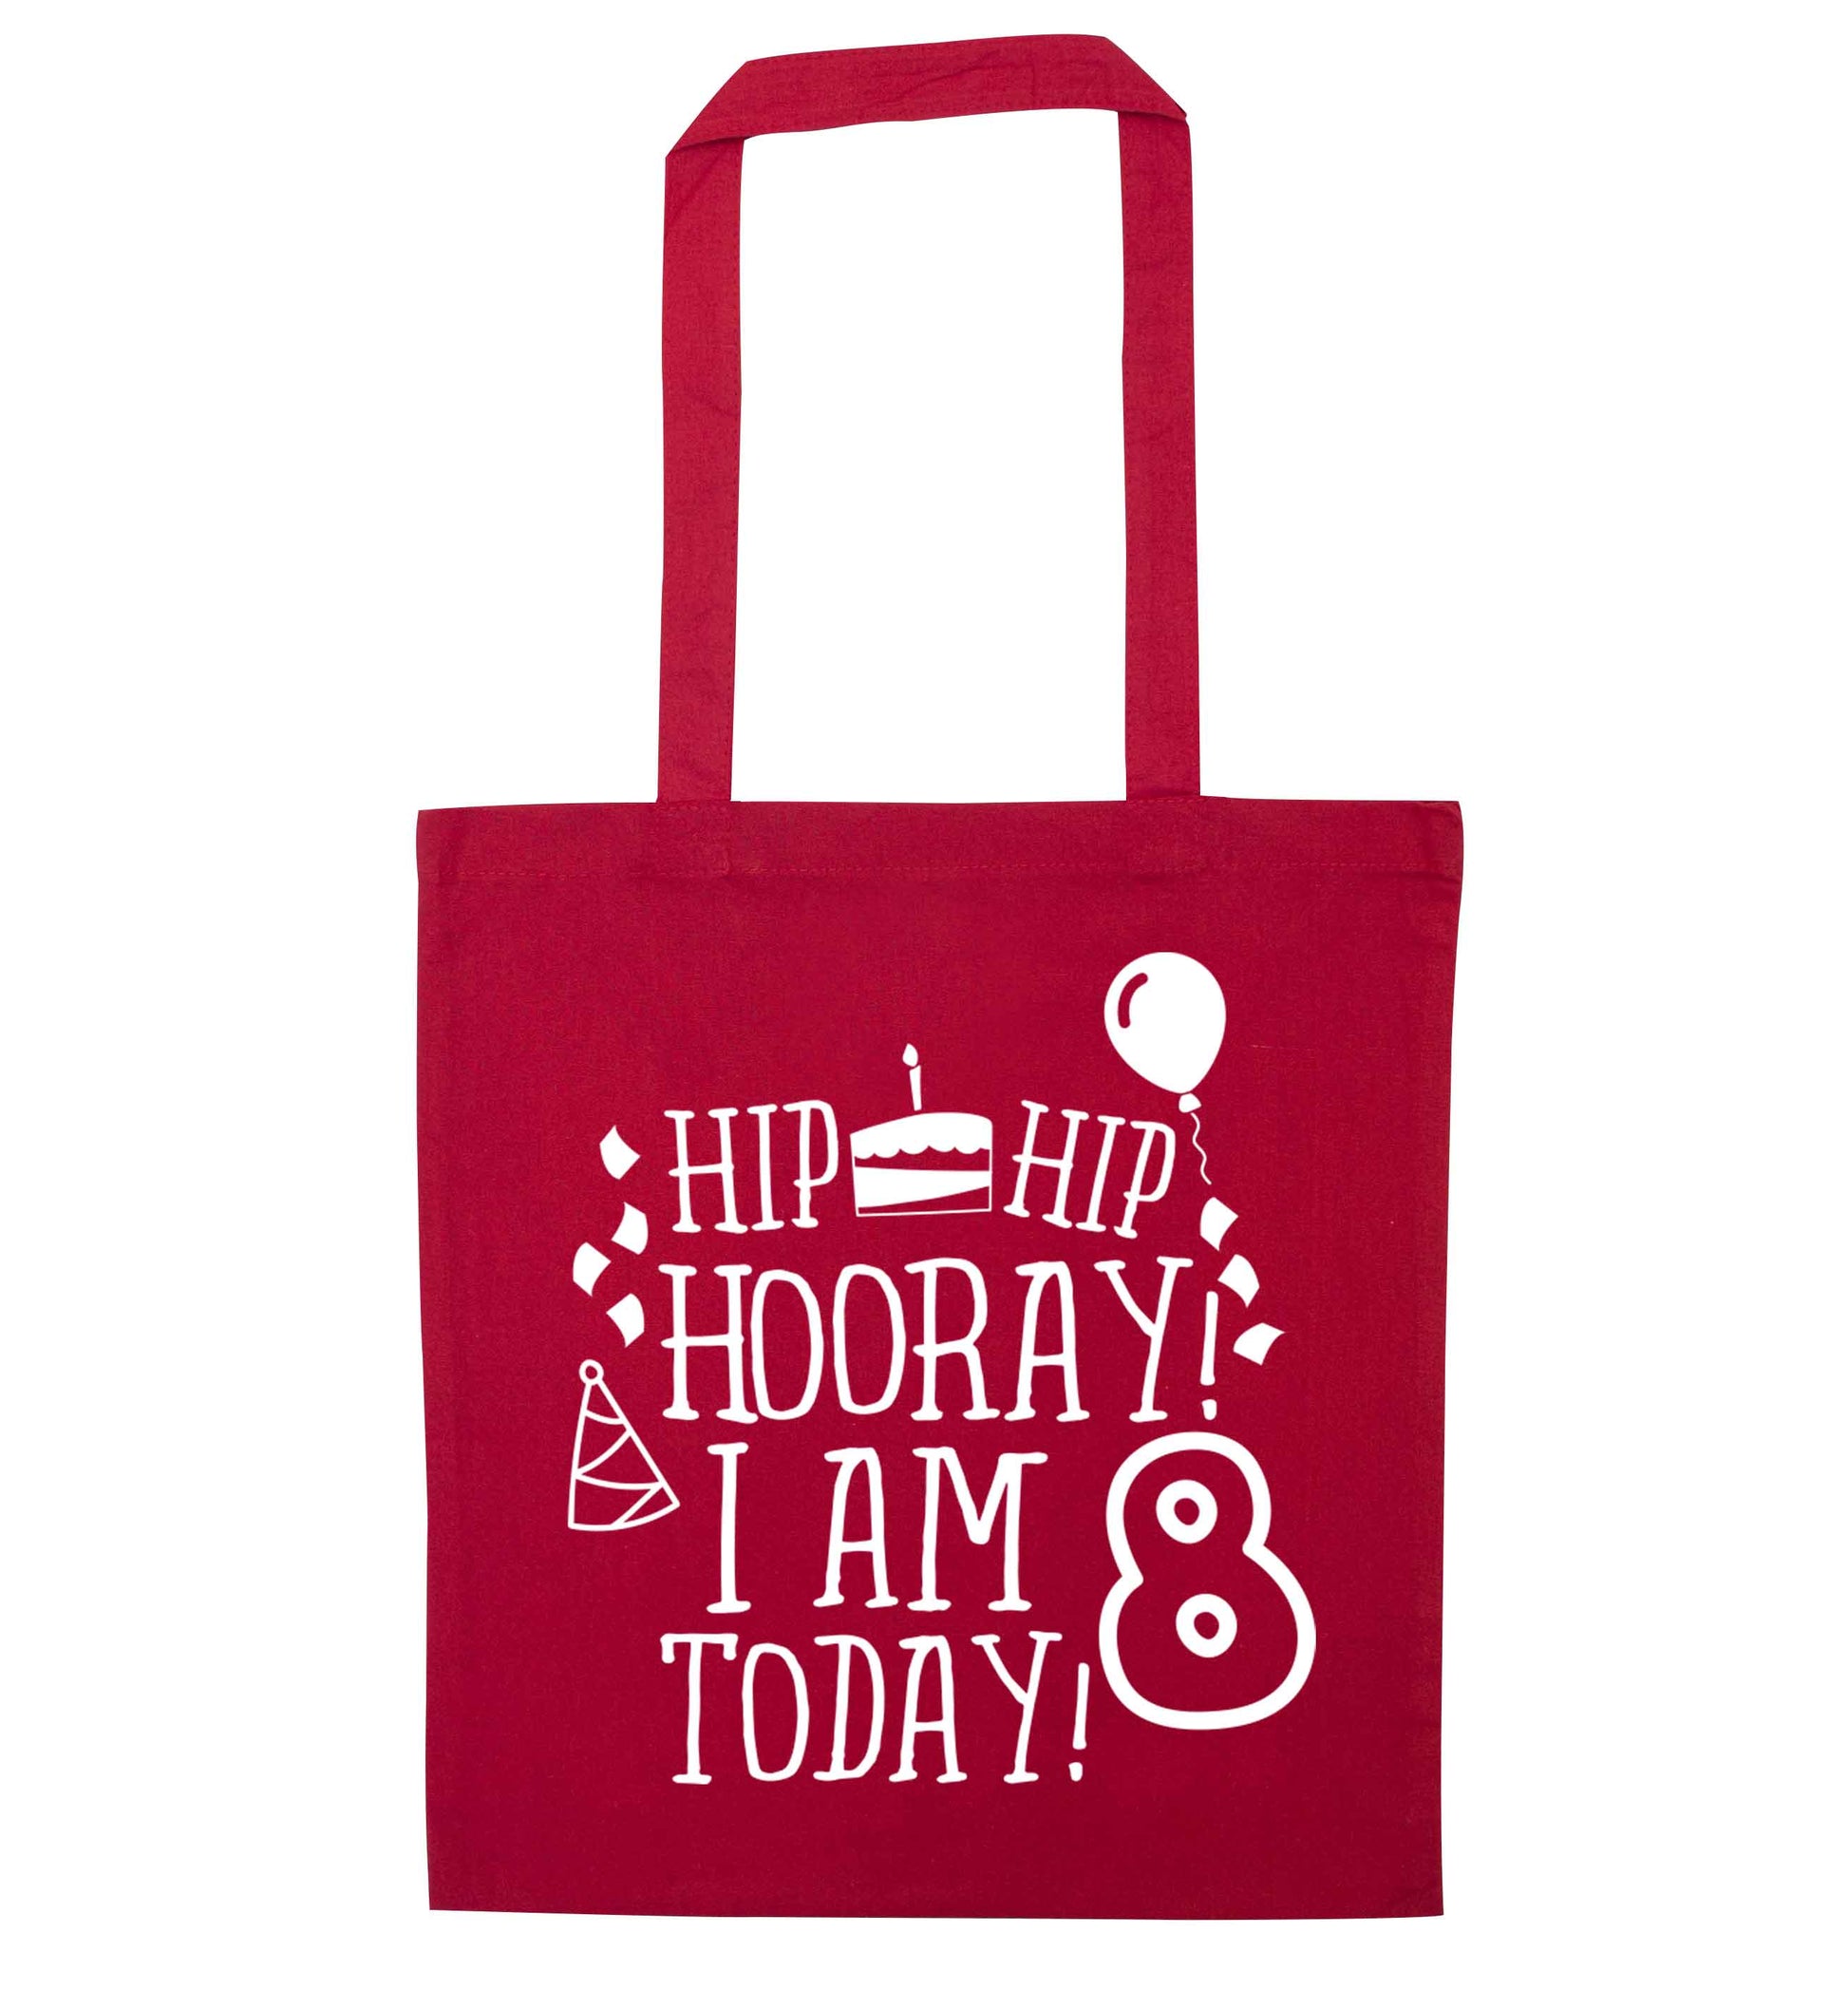 Hip hip hooray I am 8 today! red tote bag